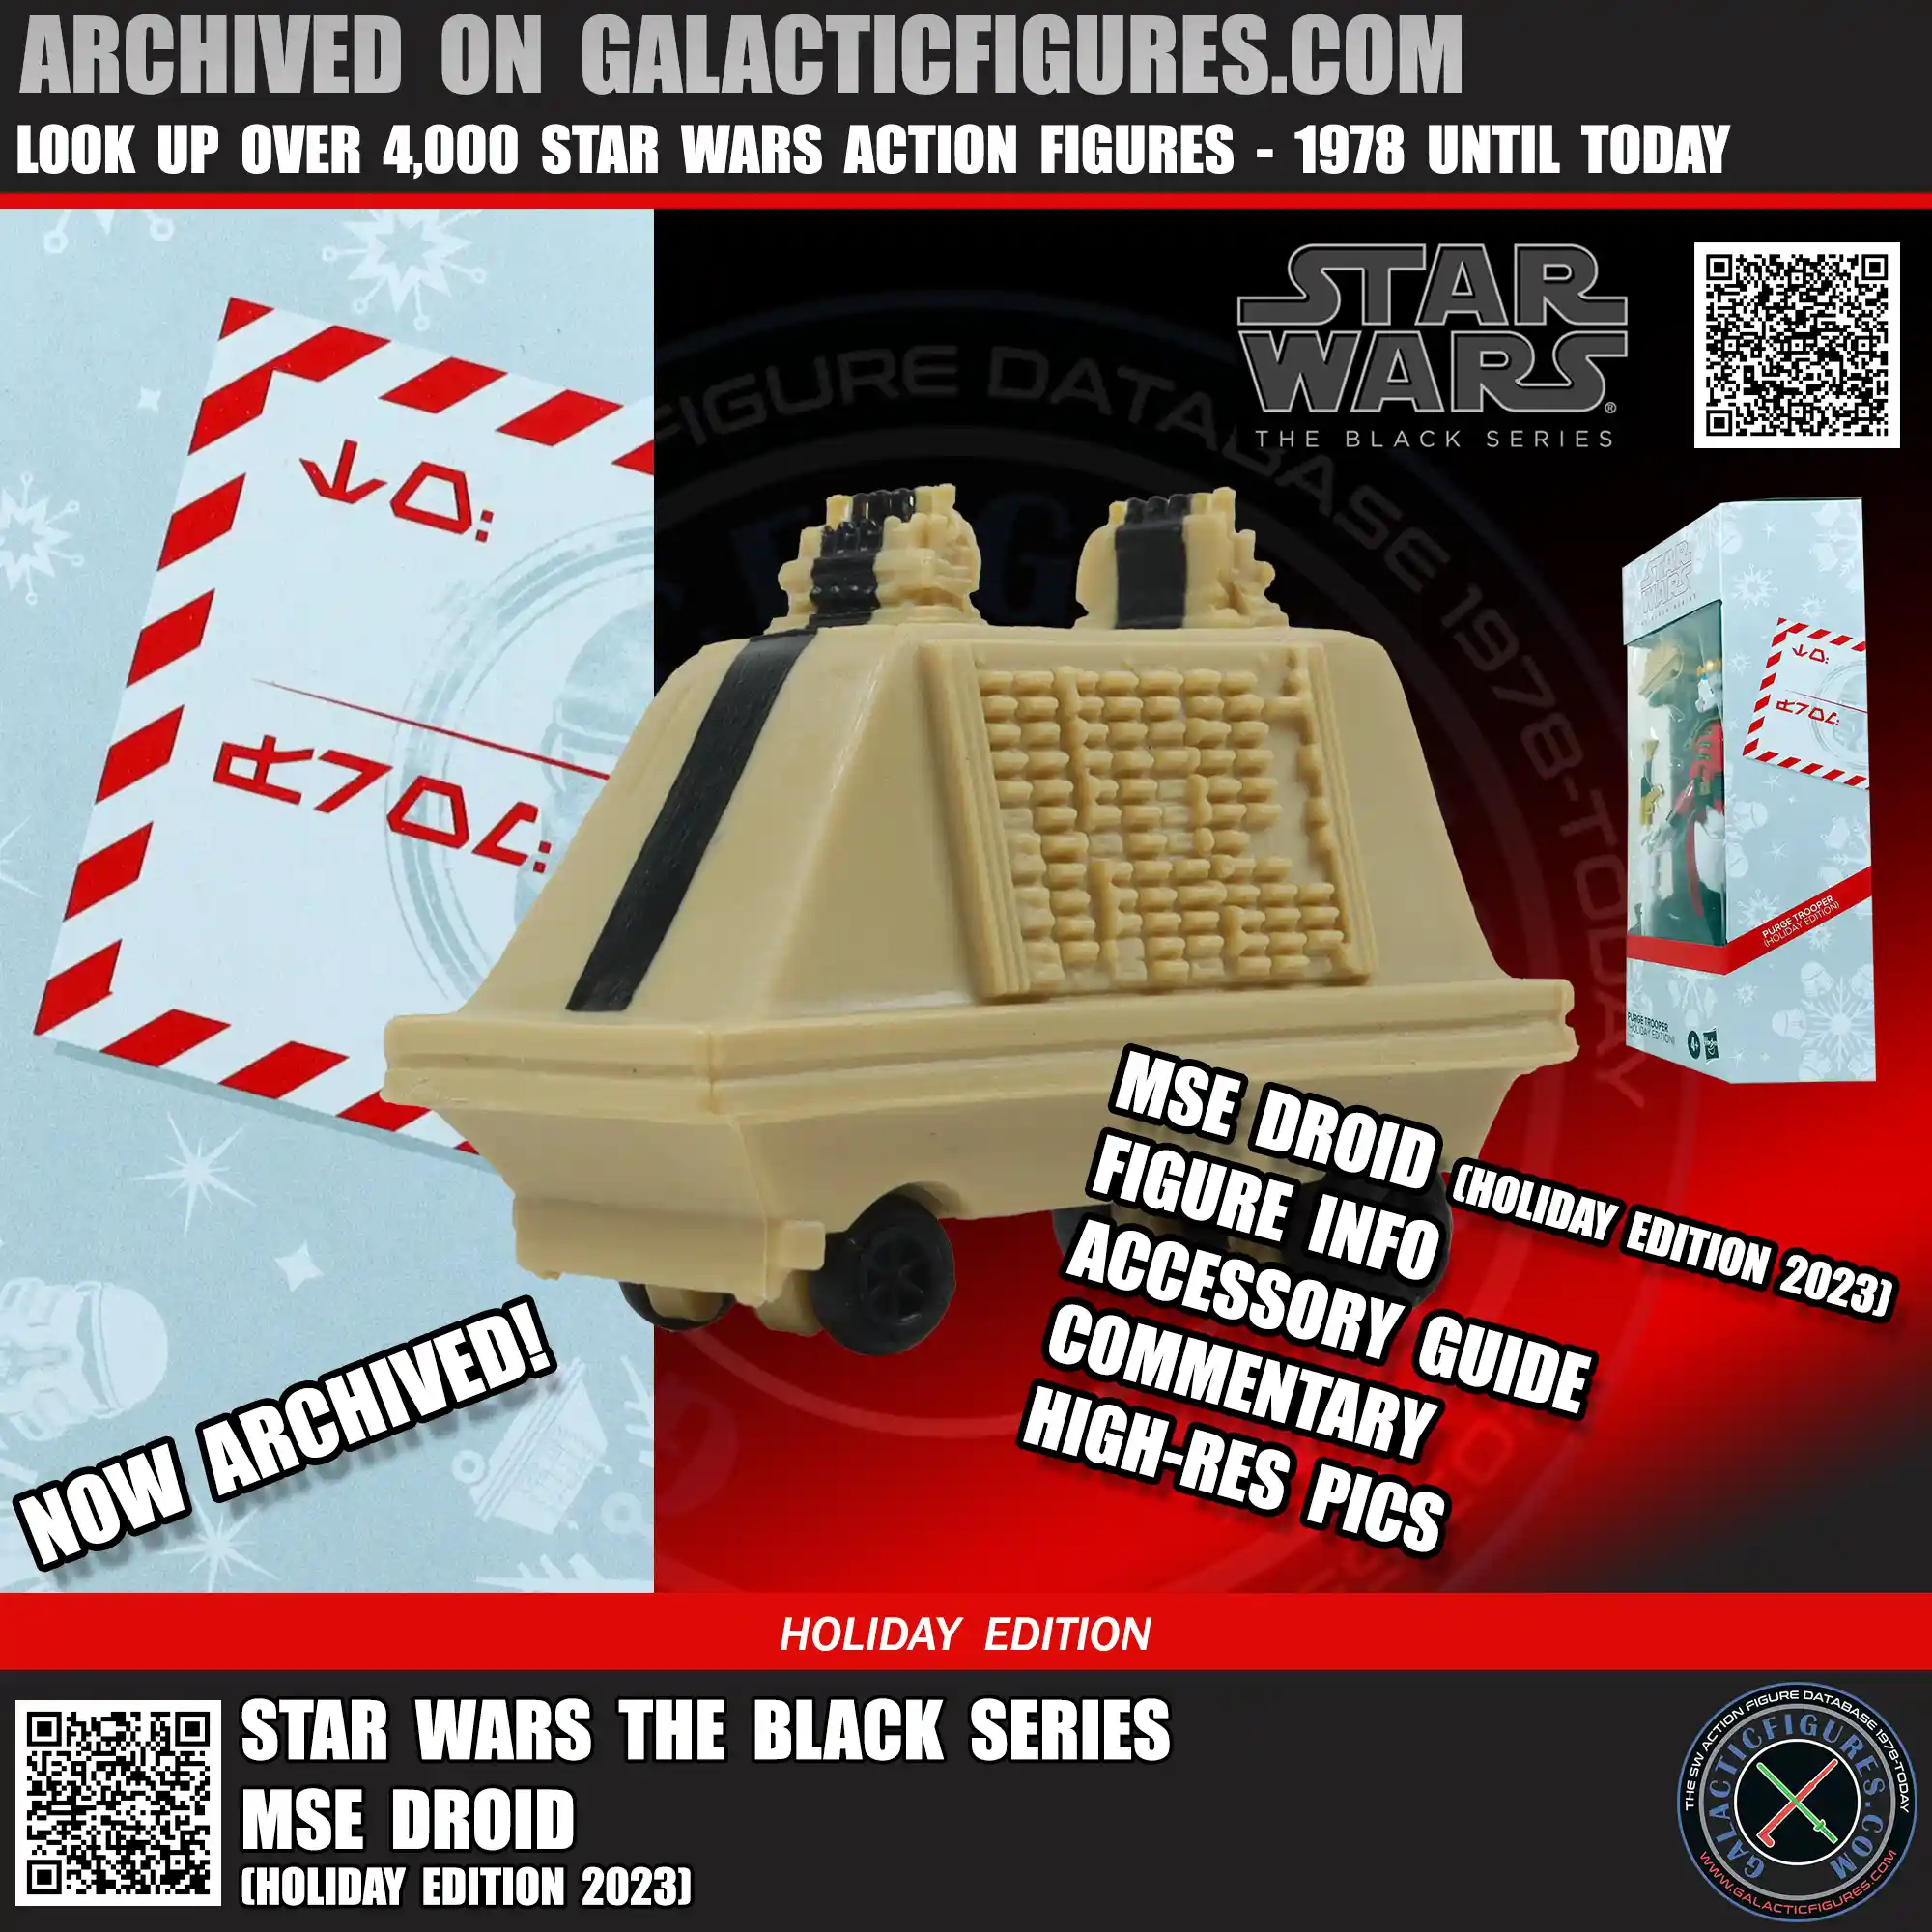 Black Series MSE Droid Holiday Edition 2023